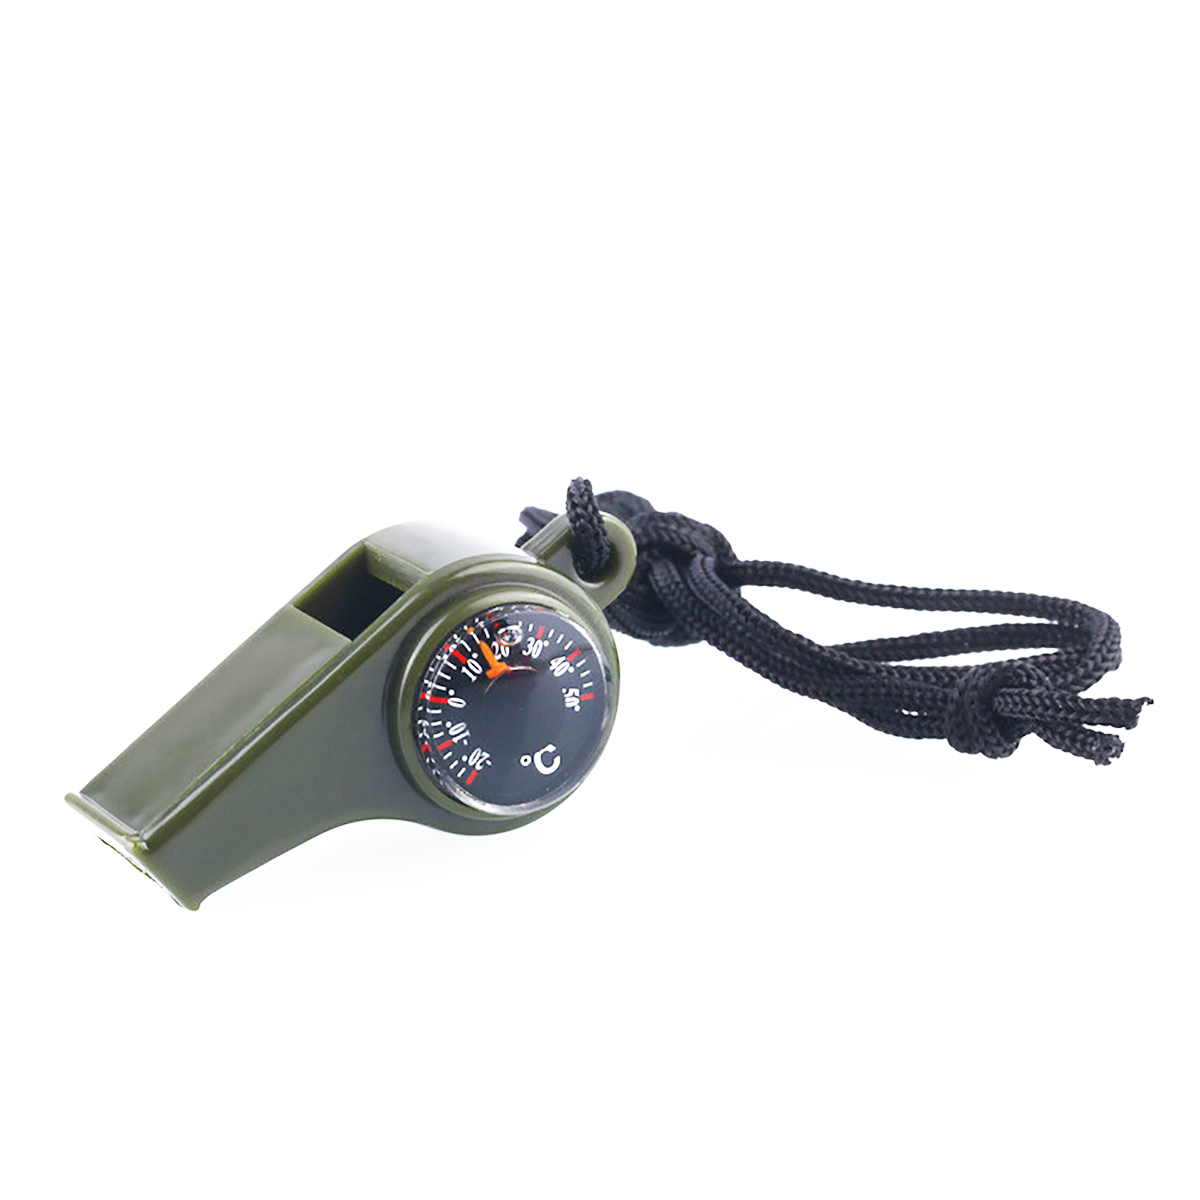 

3 In 1 Whistle Compass Thermometer Camping Outdoor Emergency Survival Gear SOS